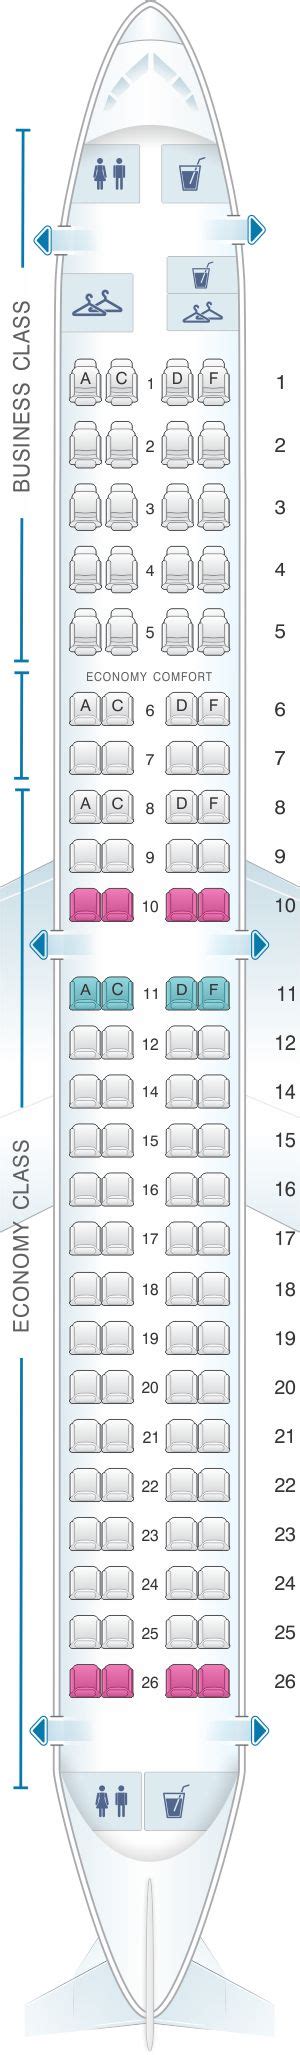 Seat Map Klm Embraer 190 Air Transat Hainan Airlines China Eastern